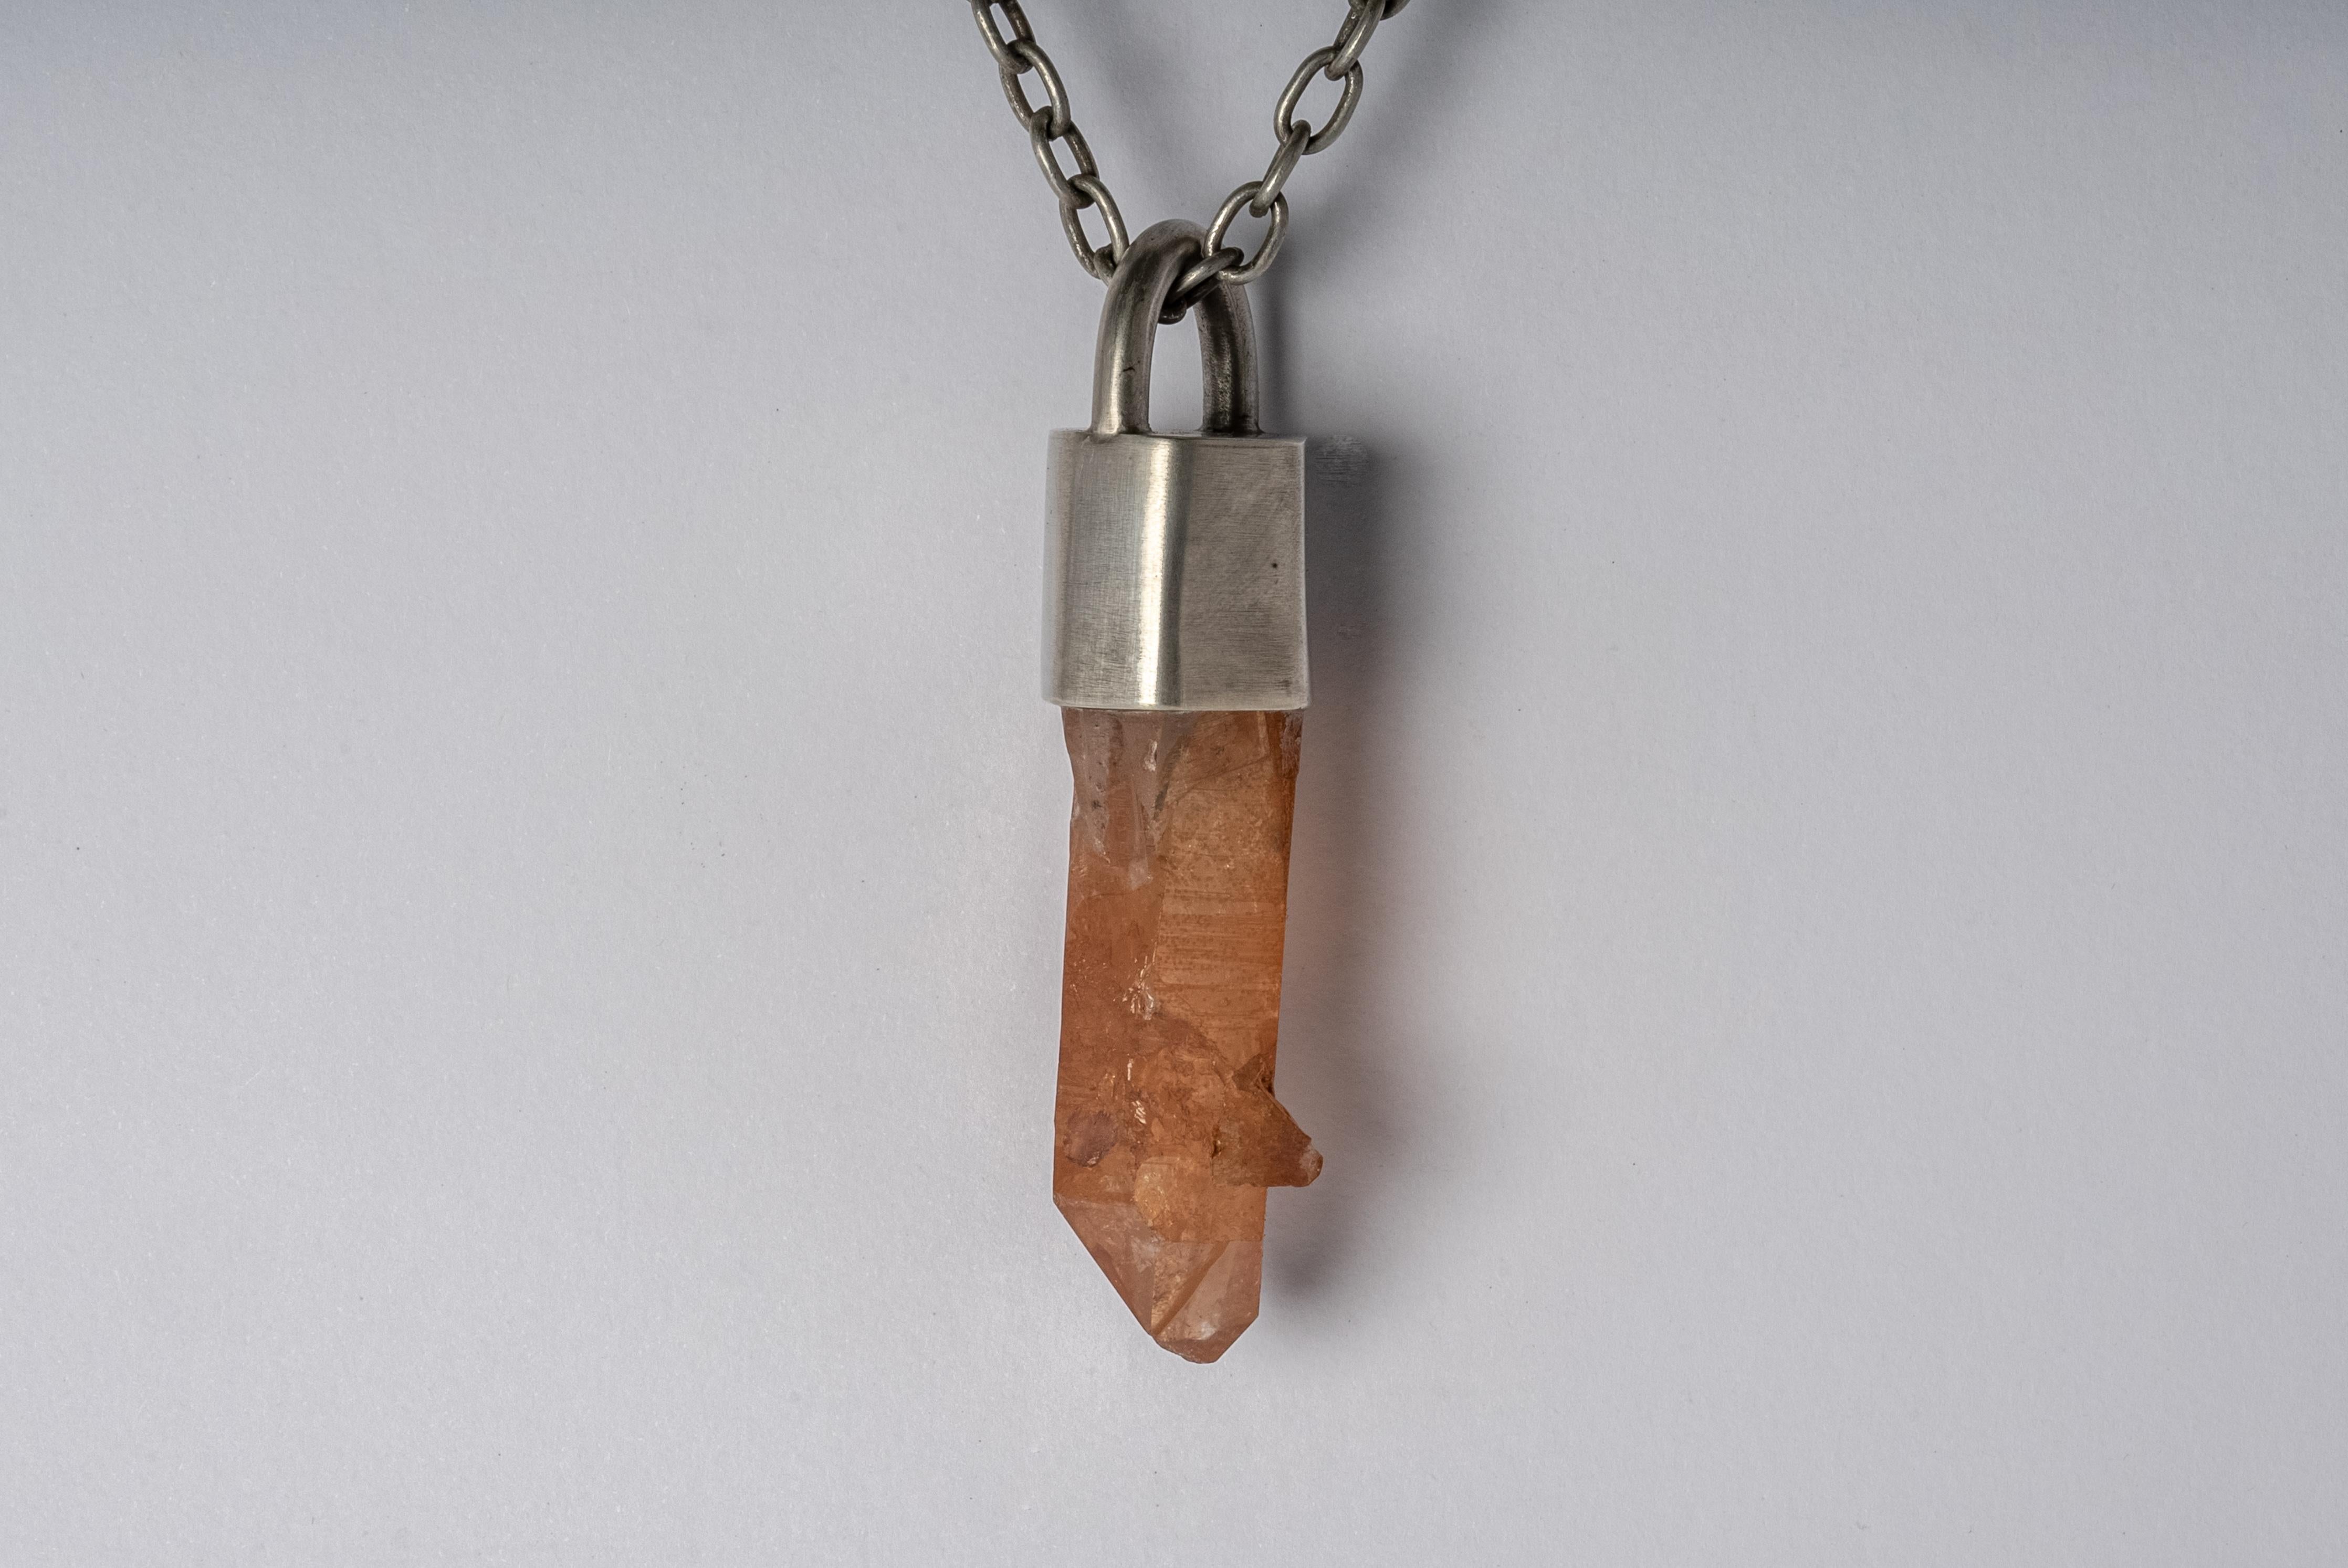 Pendant necklace in sterling silver and a rough of iron quartz. Sterling silver, dipped in acid to create a subdued surface. Results will never be identical, and this nuance / variation should be seen as a characteristic of the uniqueness of the